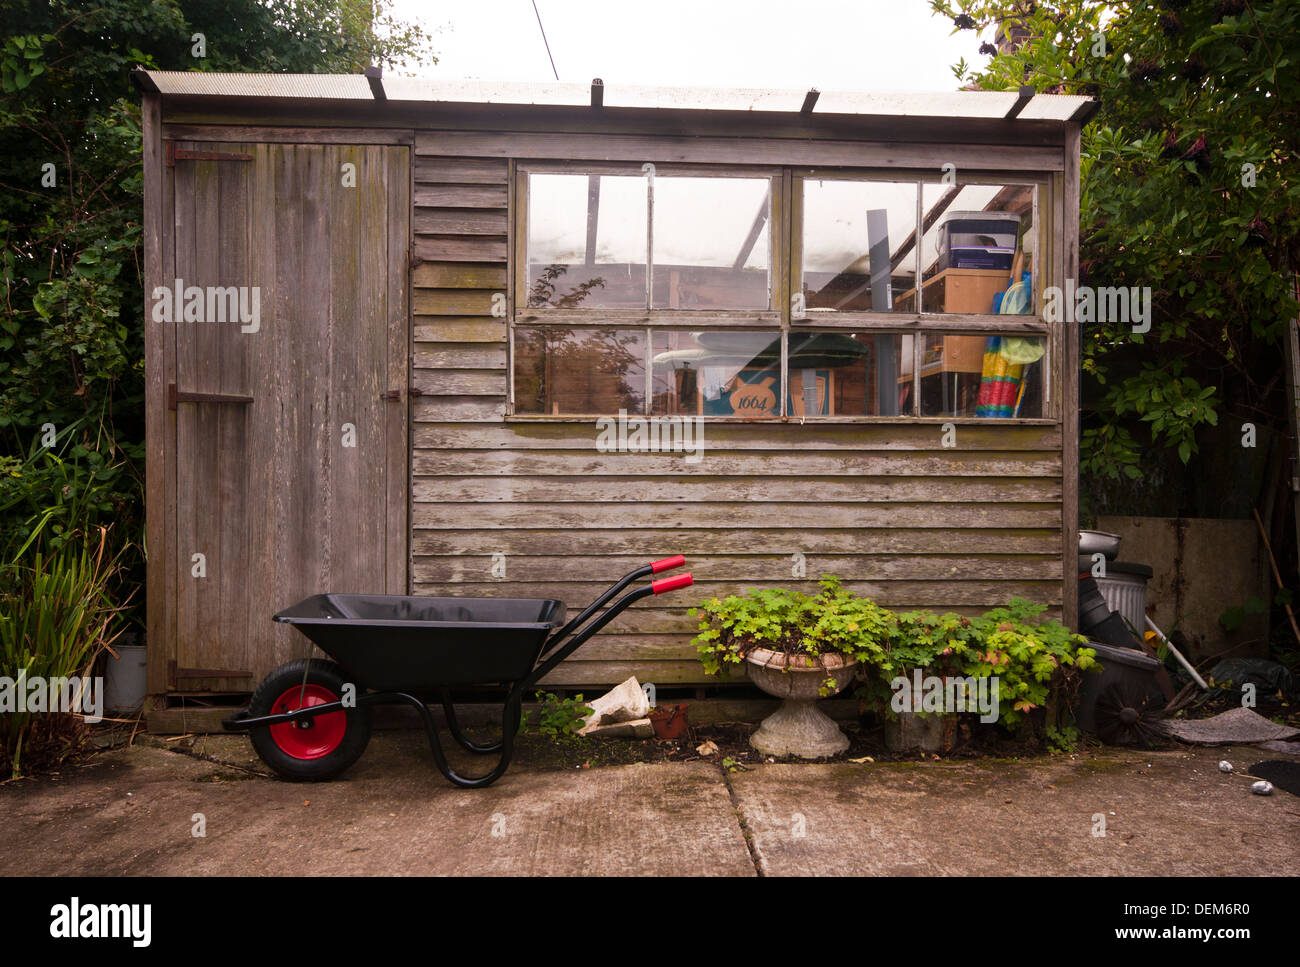 Exterior Of A Wooden Garden Shed With An Empty Metal Wheelbarrow Outside Stock Photo